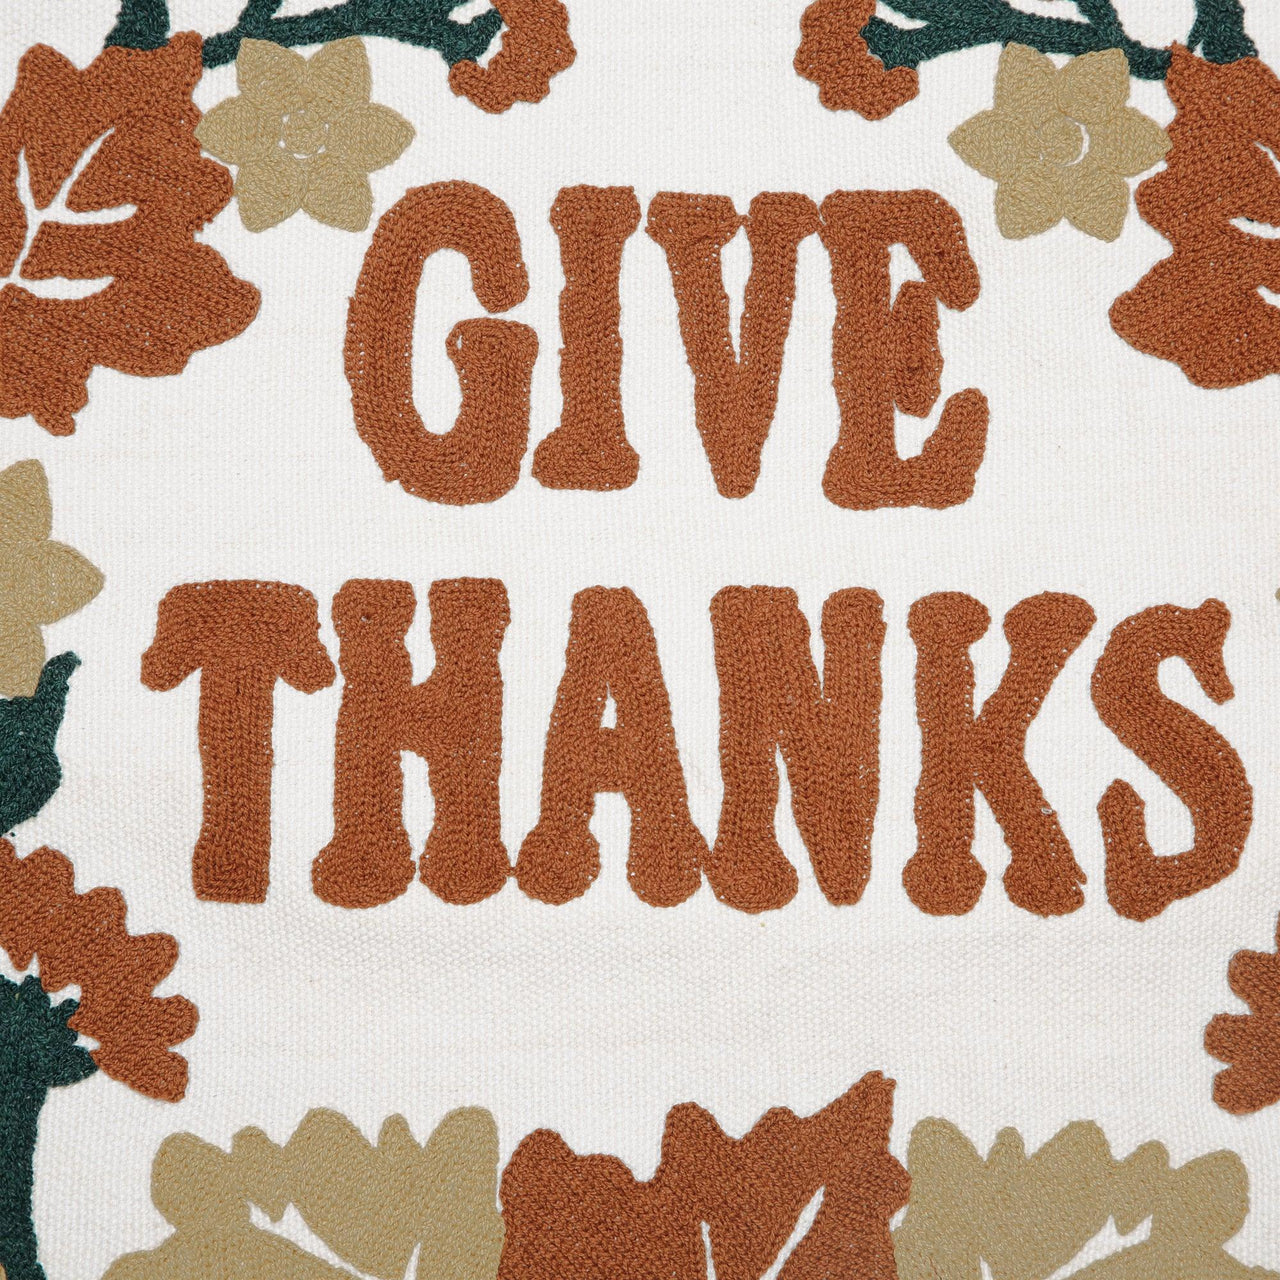 Wheat Plaid Give Thanks Pillow Cover 18x18 VHC Brands - The Fox Decor